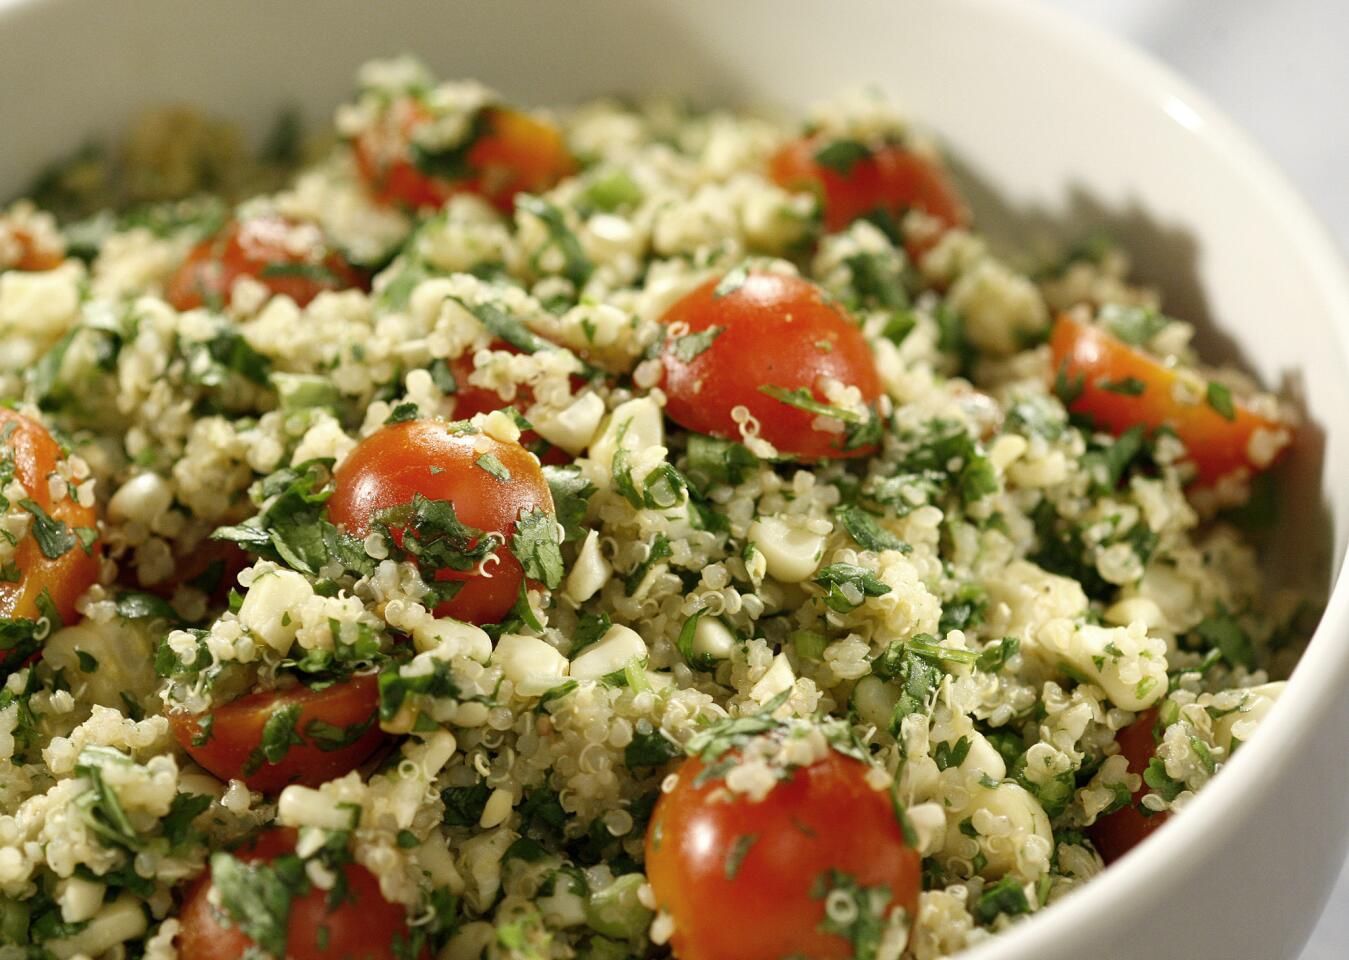 Quinoa salad with grilled corn, tomatoes and cilantro